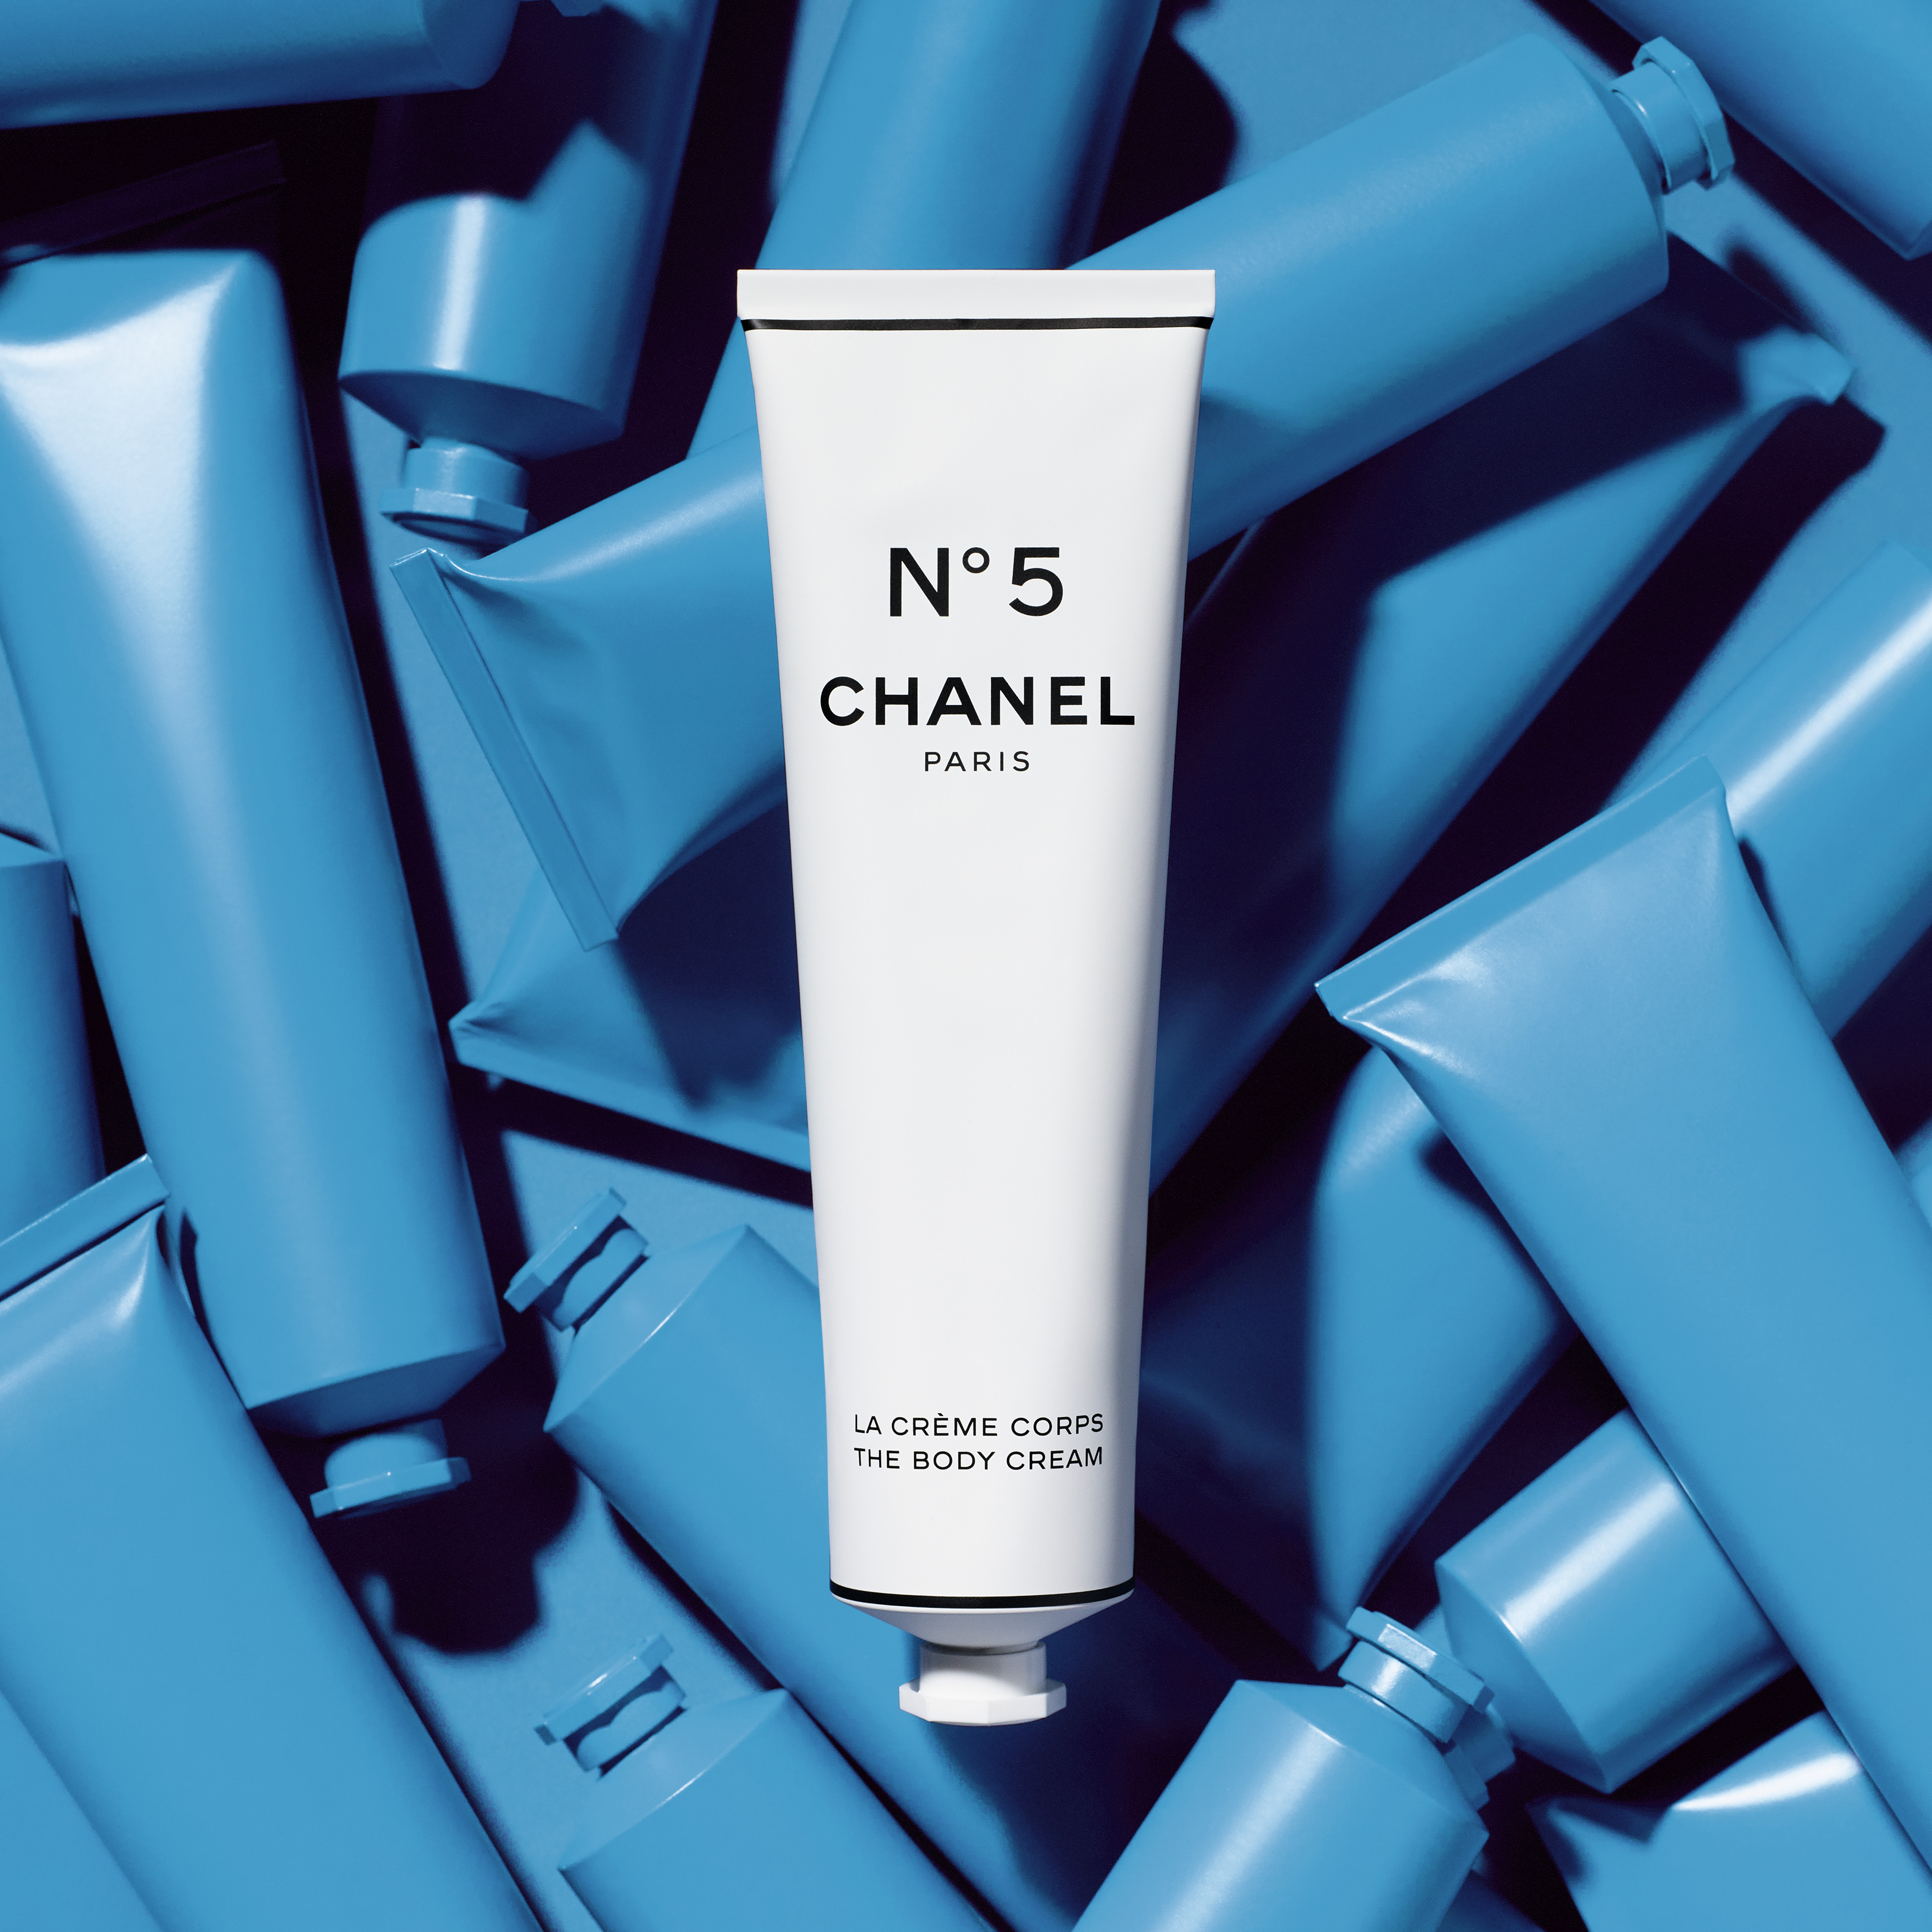 Chanel - Factory 5 - Campaigns and content - E-commerces & platforms -  Creative Intelligence - Fragrance & beauty - Mazarine Digital